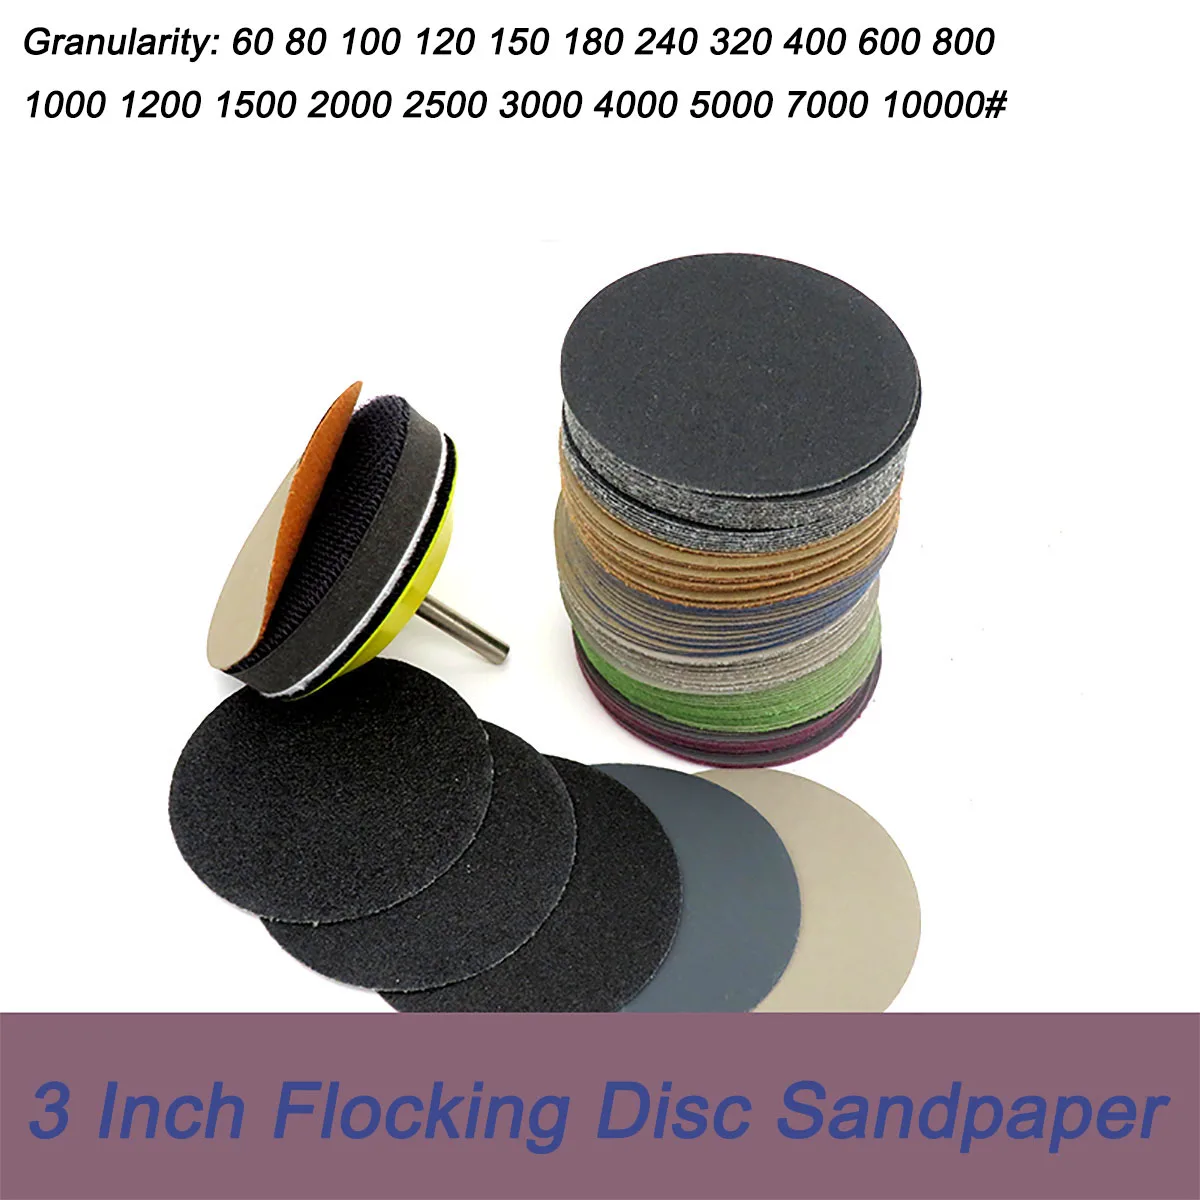 

10Pcs Size 3 Inch, Diameter 75mm Wet and Dry Flocking Disc Sandpapers Granularity 60 - 10000# for Jade Grinding and Polishing